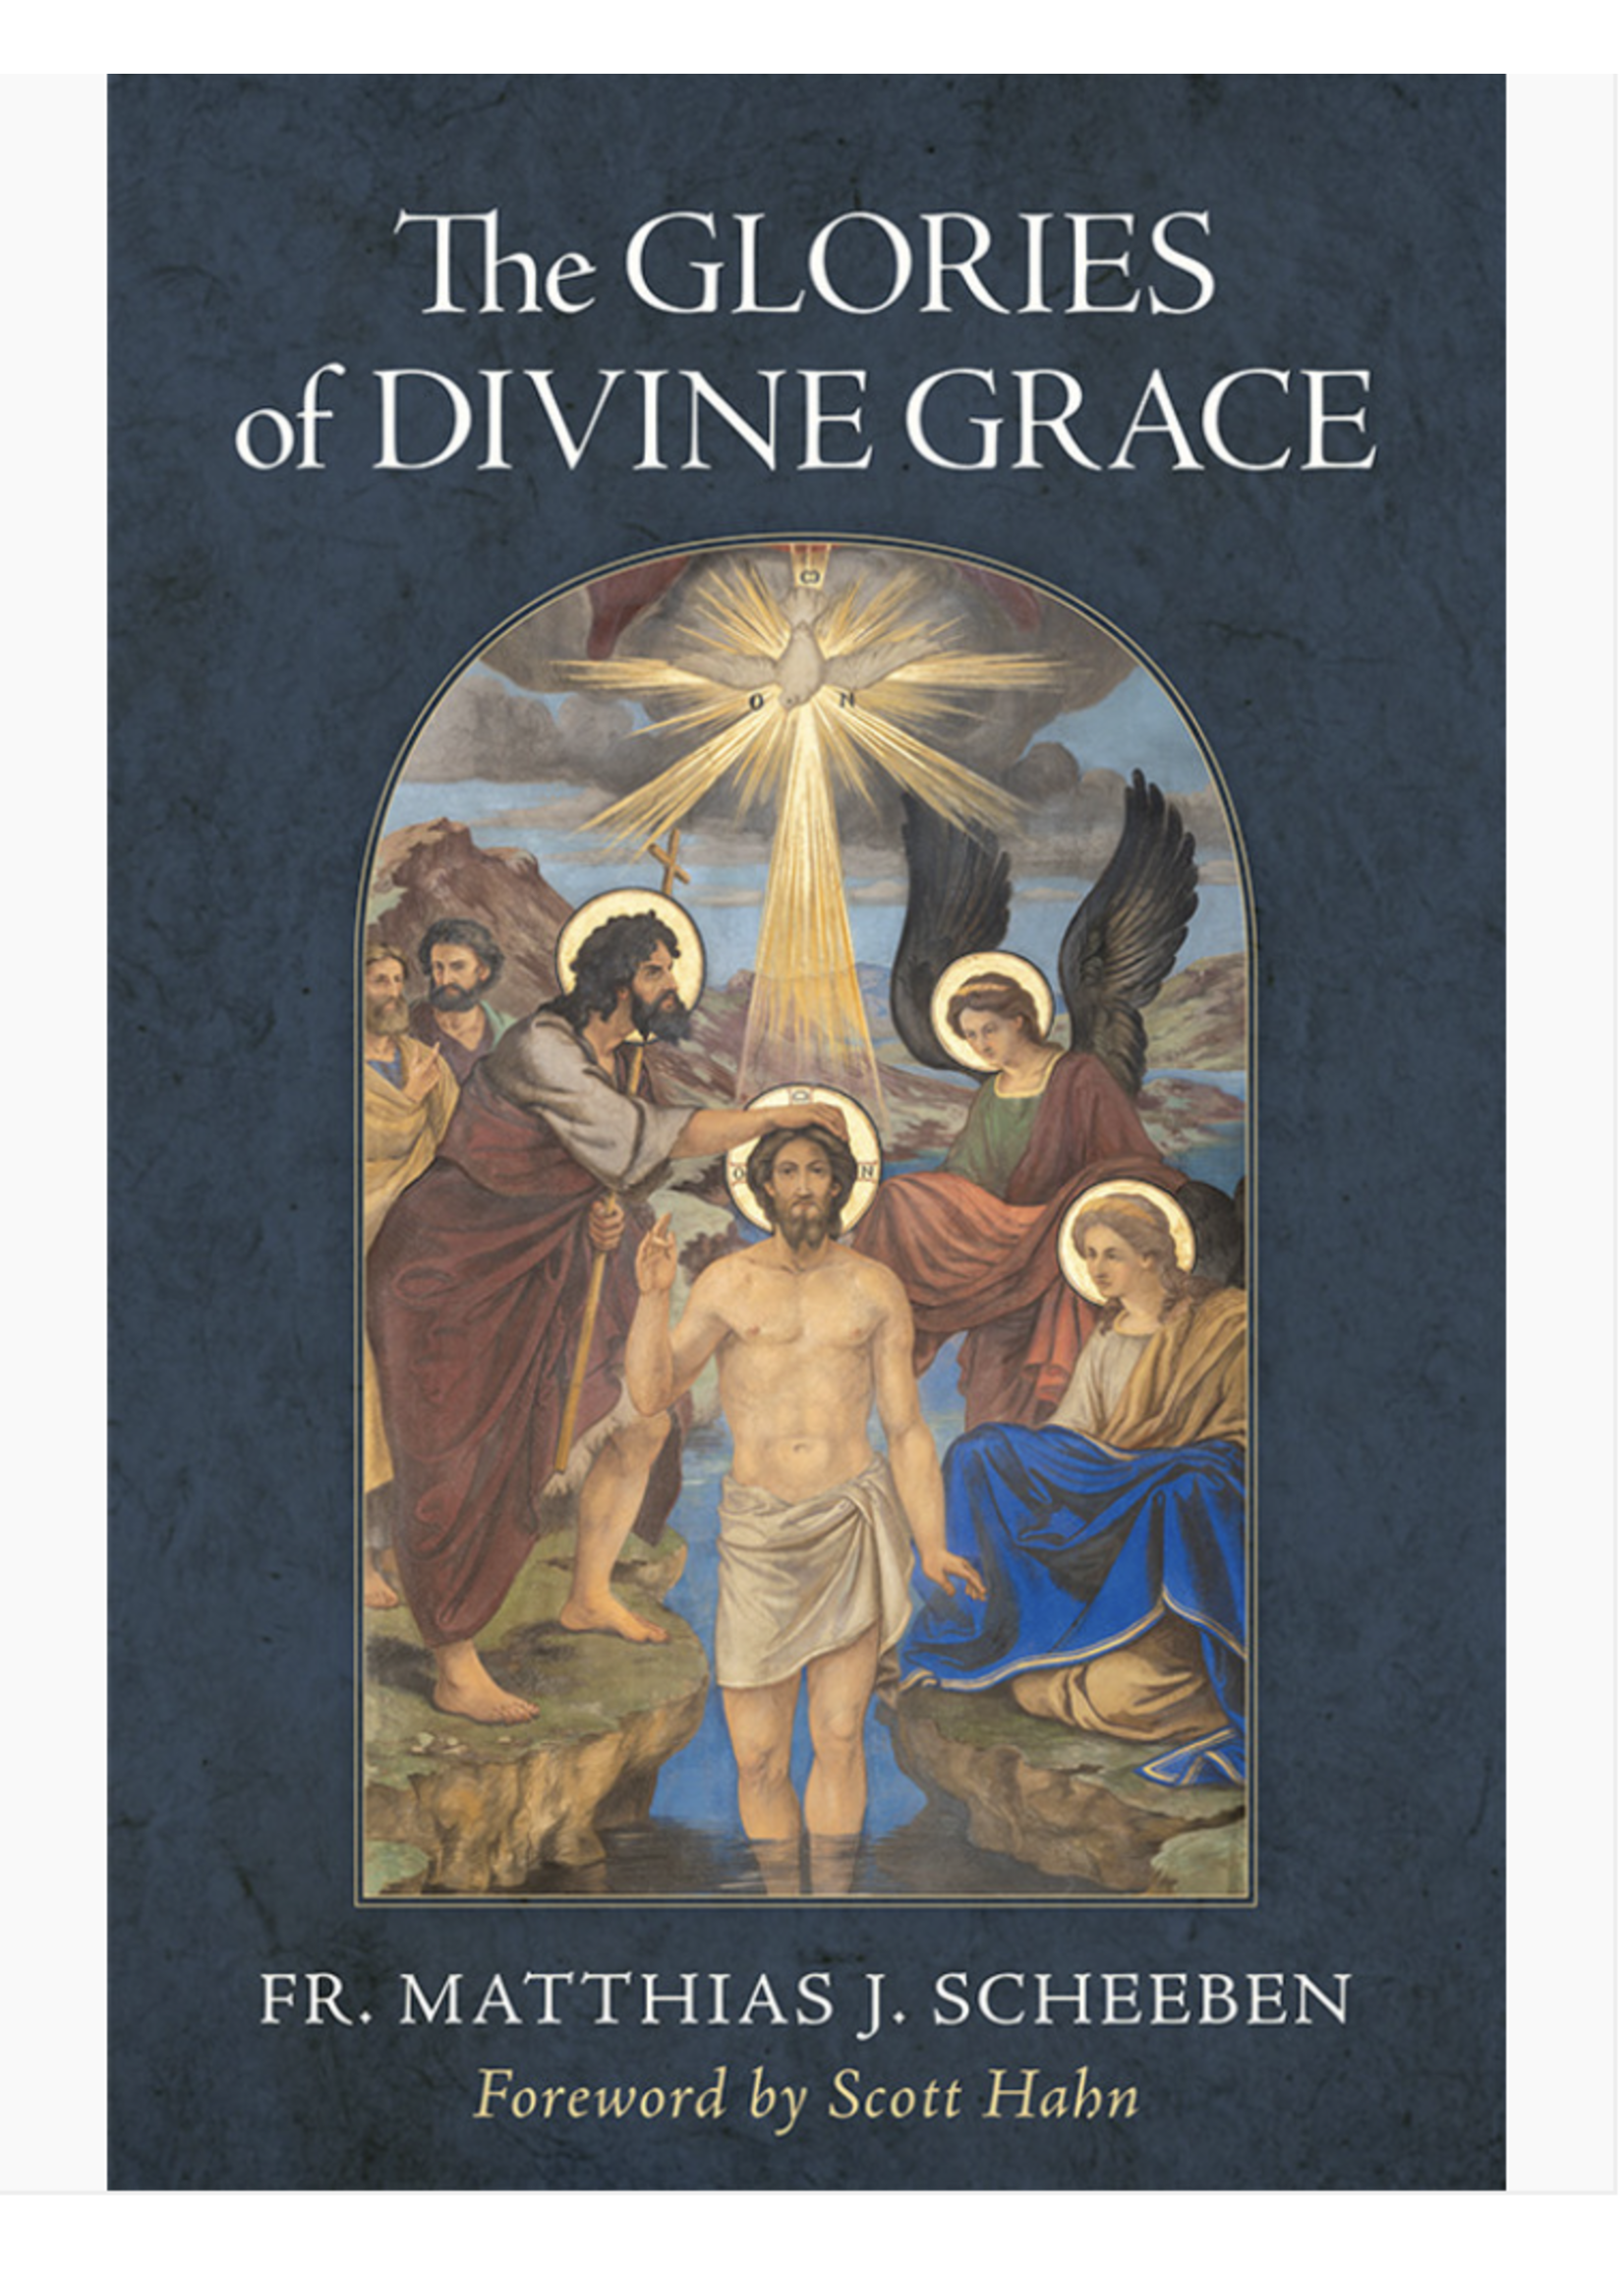 TAN Books The Glories of Divine Grace: A Fervent Exhortation to All to Preserve and to Grow in Sanctifying Grace